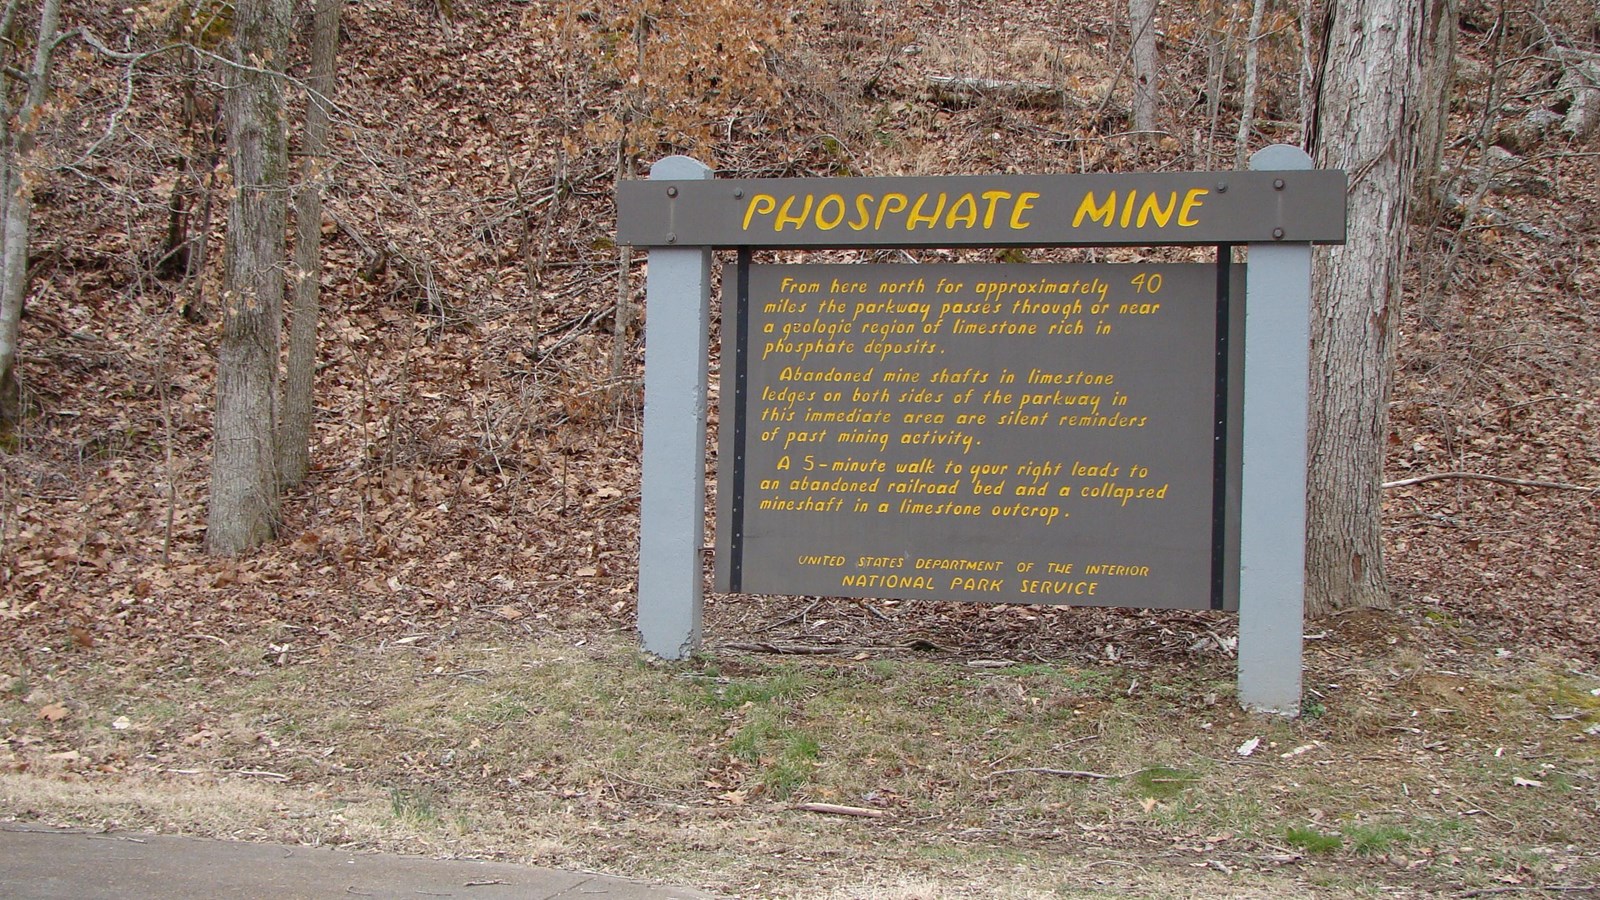 Wooden sign painted with yellow letters. Phosphate Mine is across the top